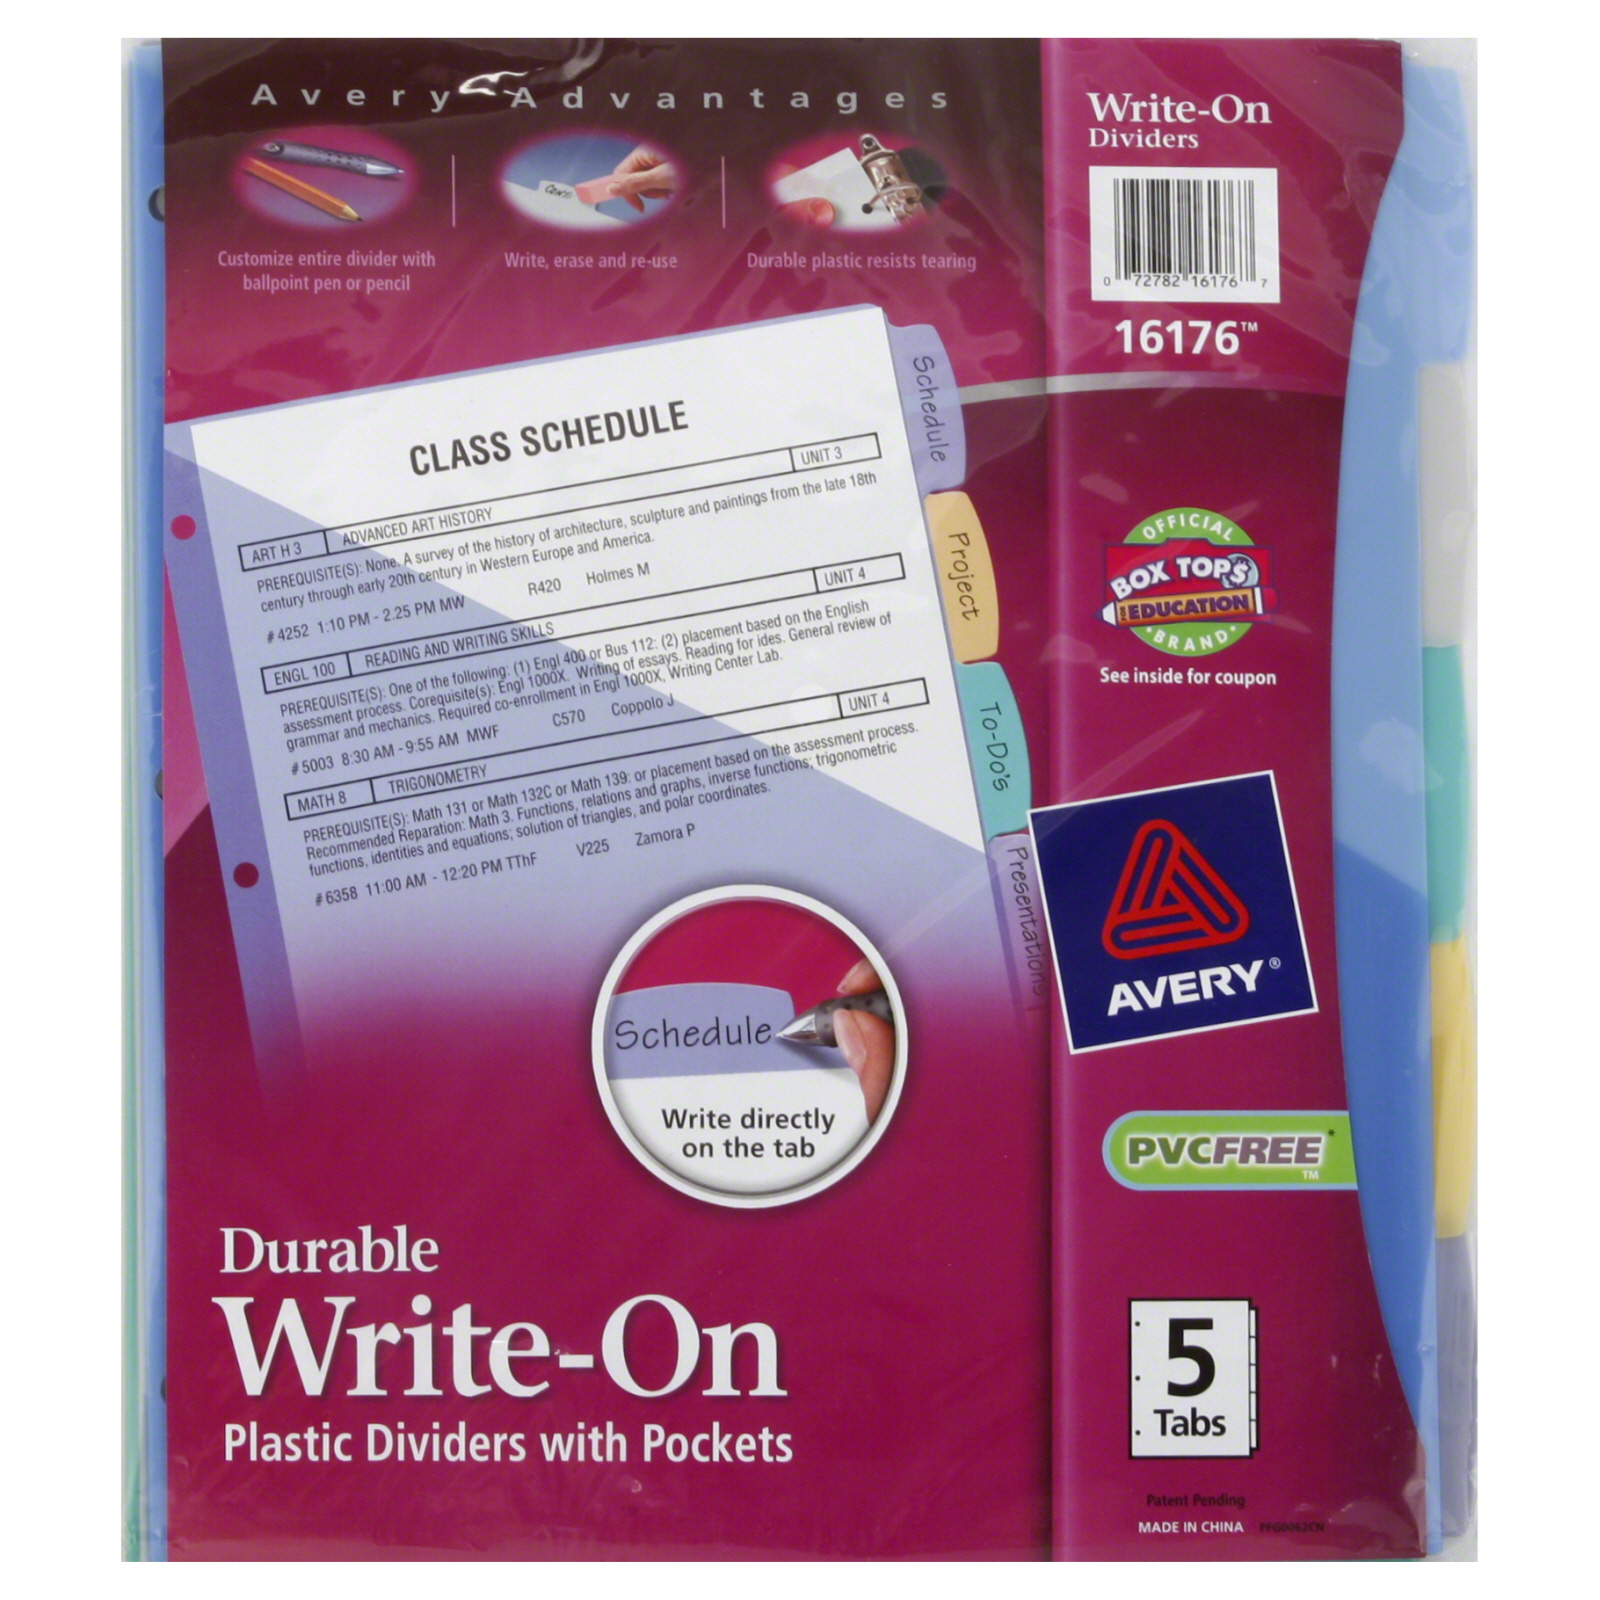 Avery 2033119 Advantages Dividers, Plastic, with Pockets, Write-On, 5 dividers